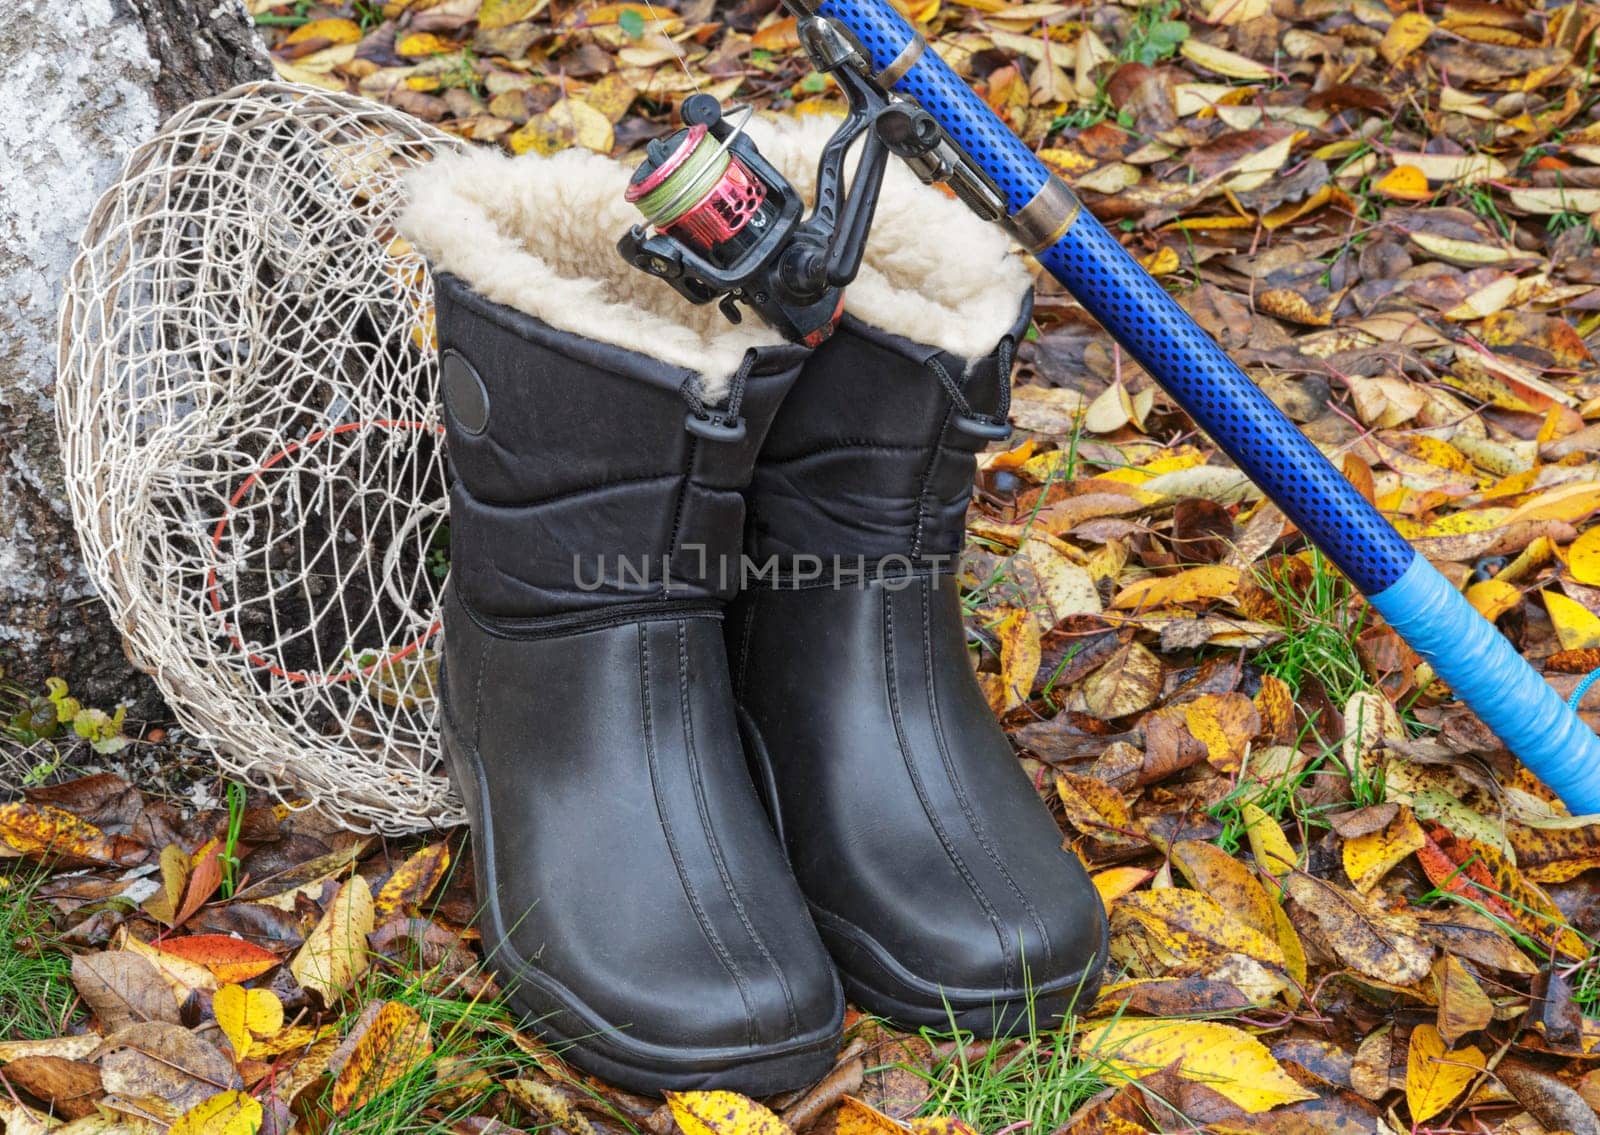 On earth on a background of autumn leaves are the items for fishing: landing net, spinning and warm waterproof boots.